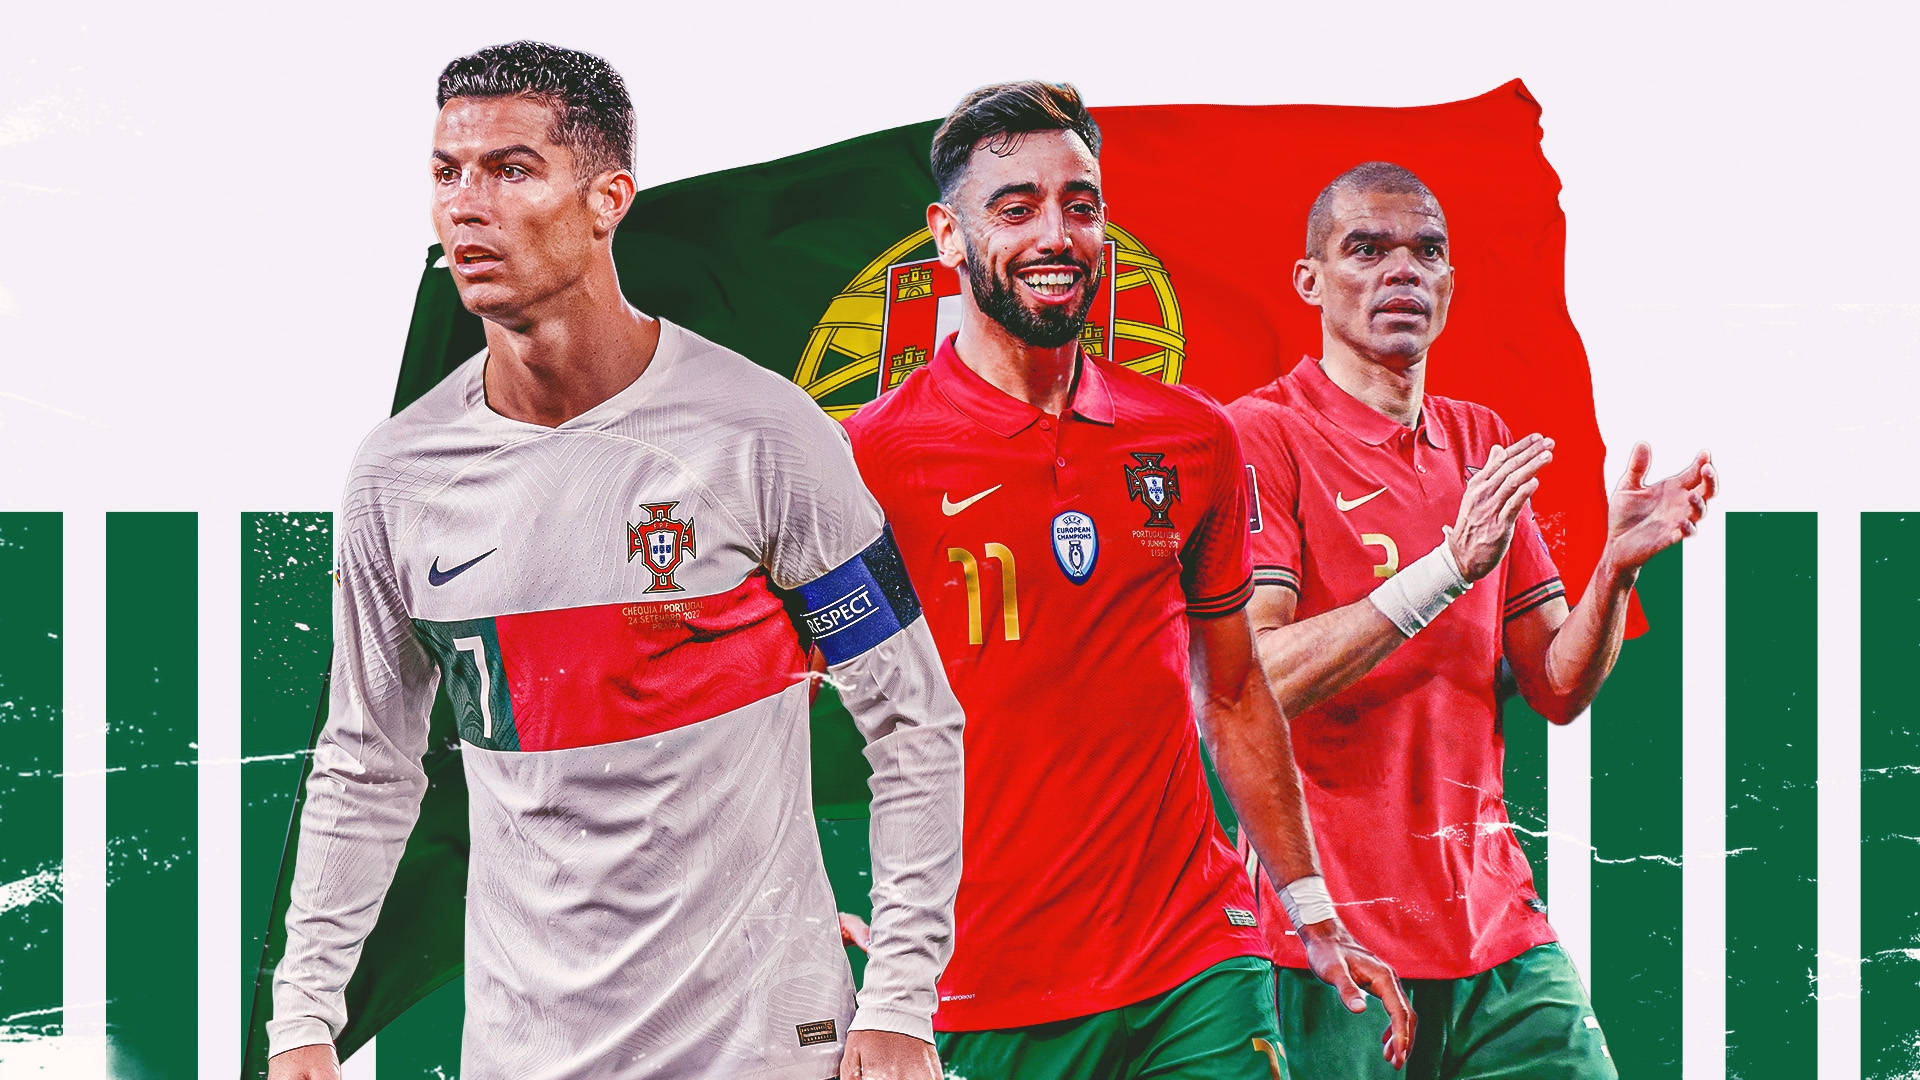 The Trio Of Portugal National Football Team Wallpaper